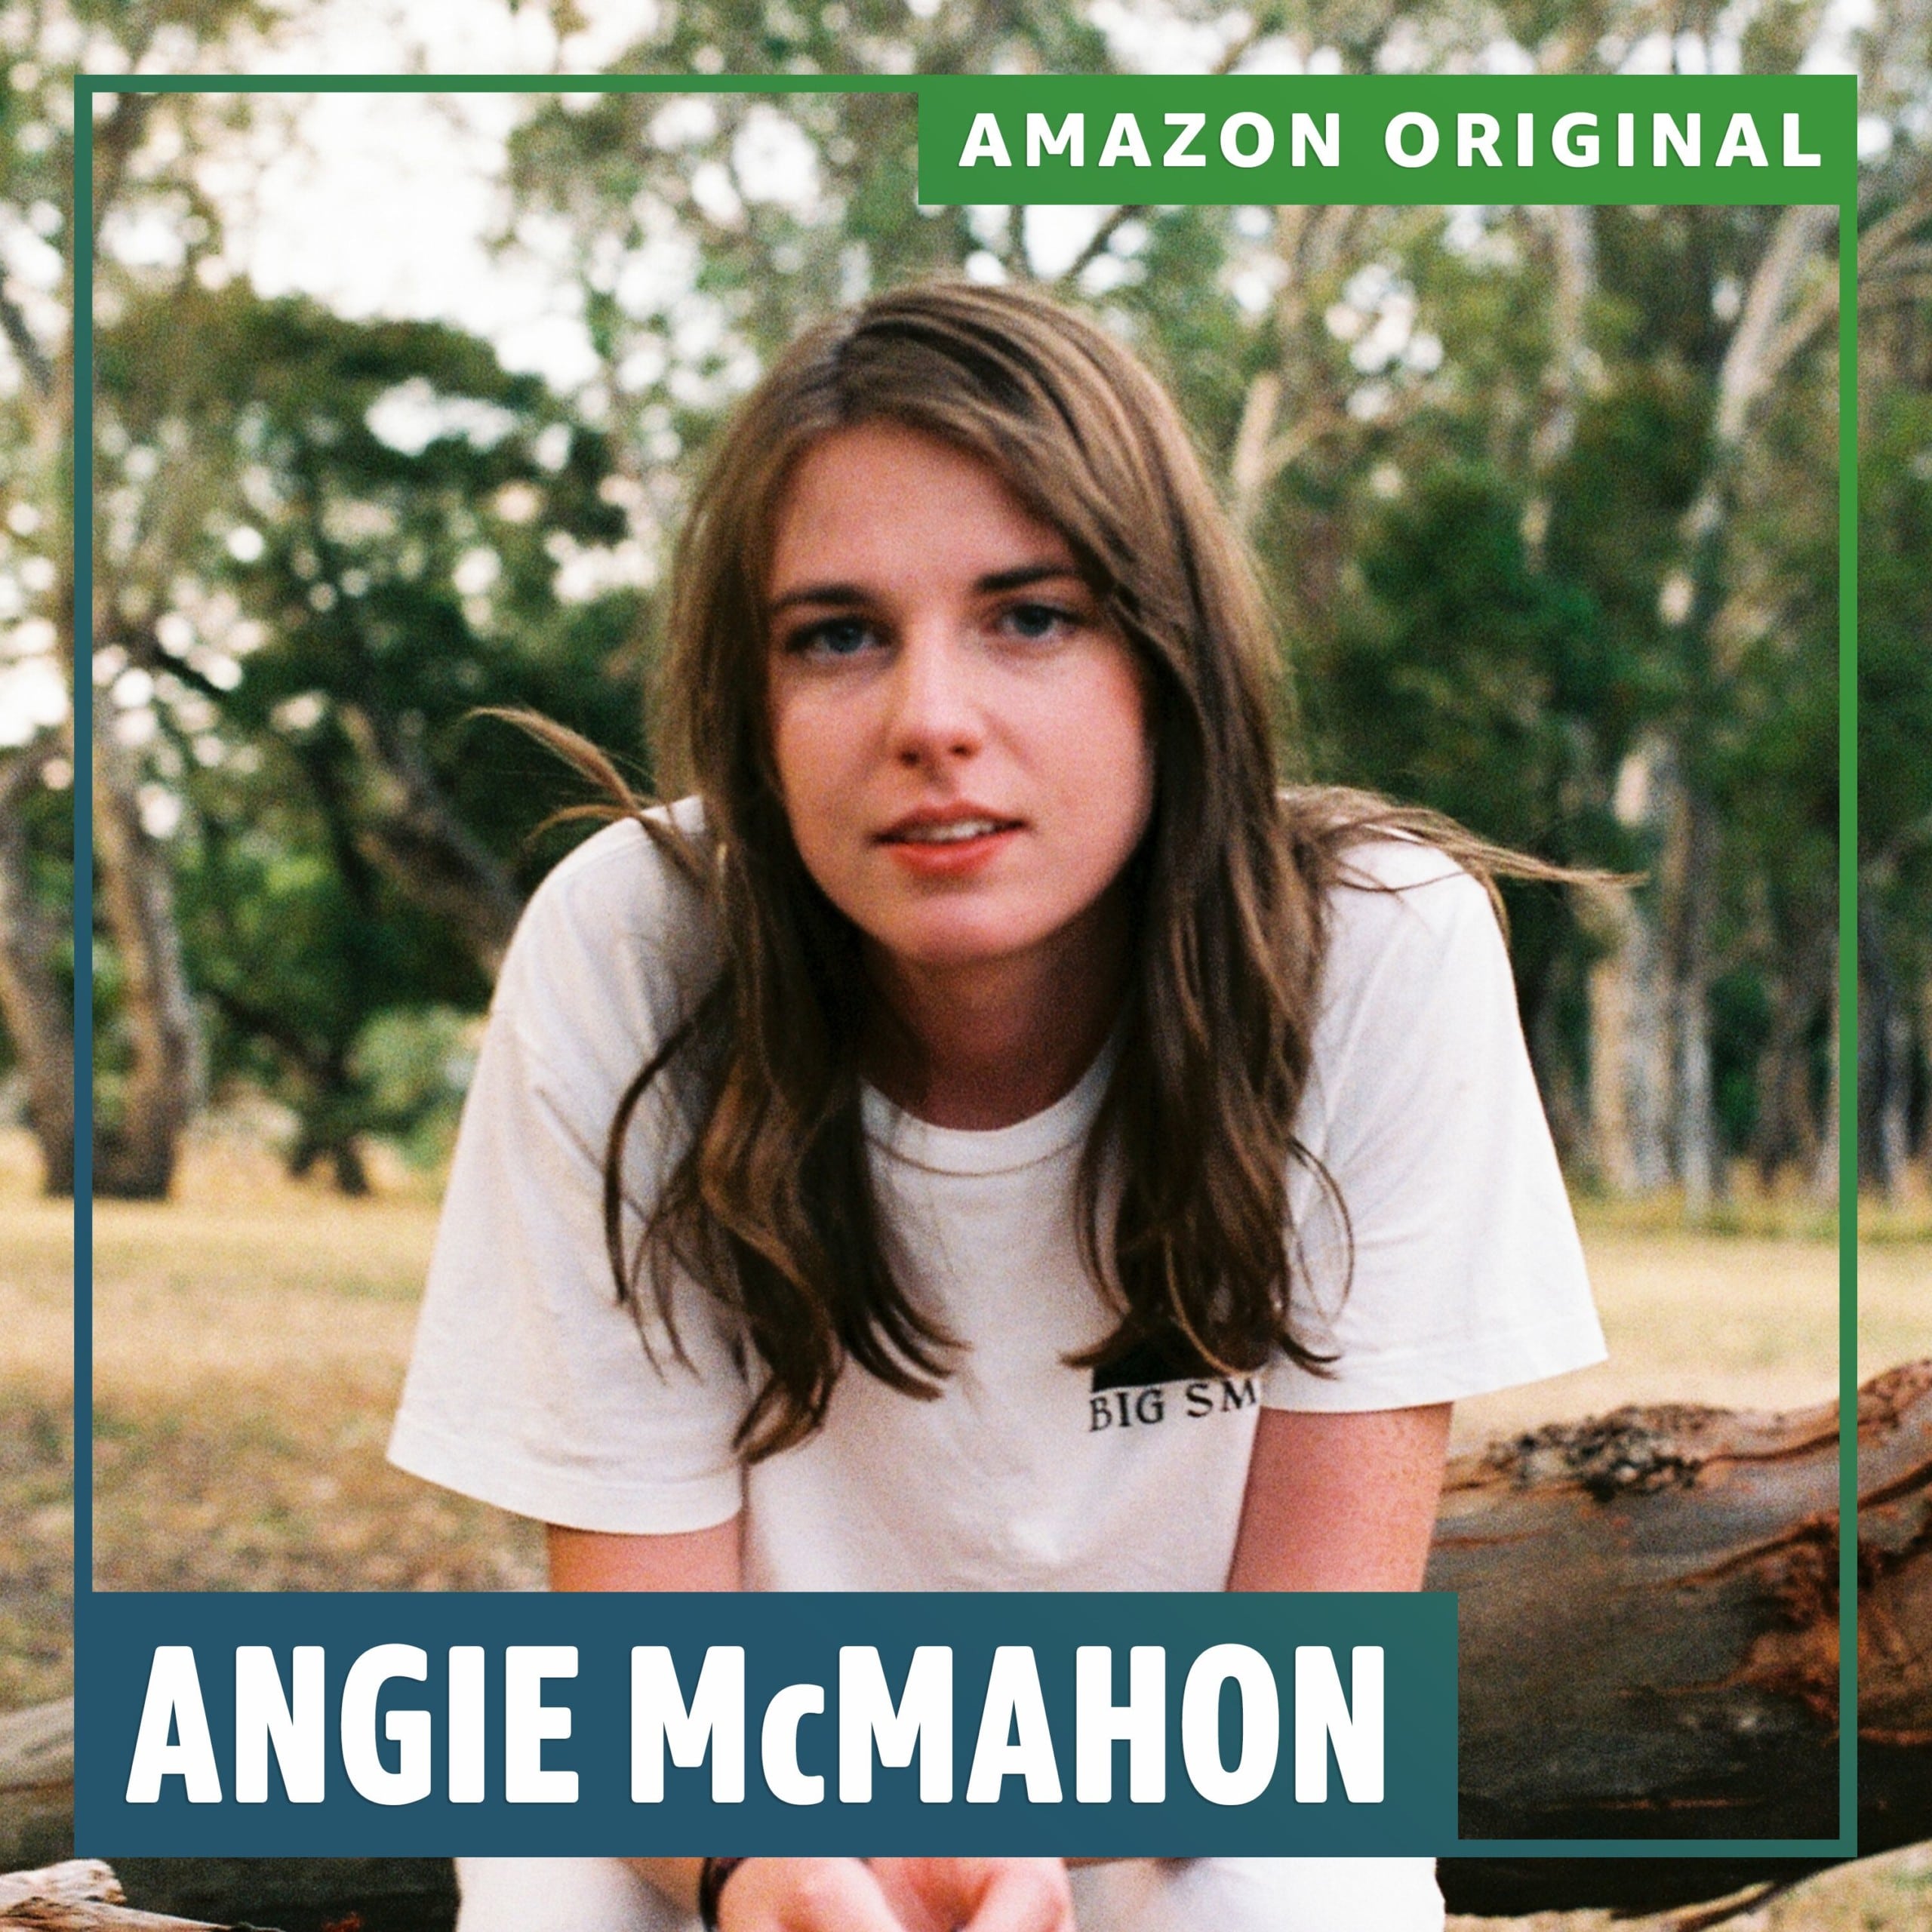 Angie McMahon Releases Cover Of “Total Eclipse Of The Heart” To Raise Money For Australian Wildfire Relief Efforts